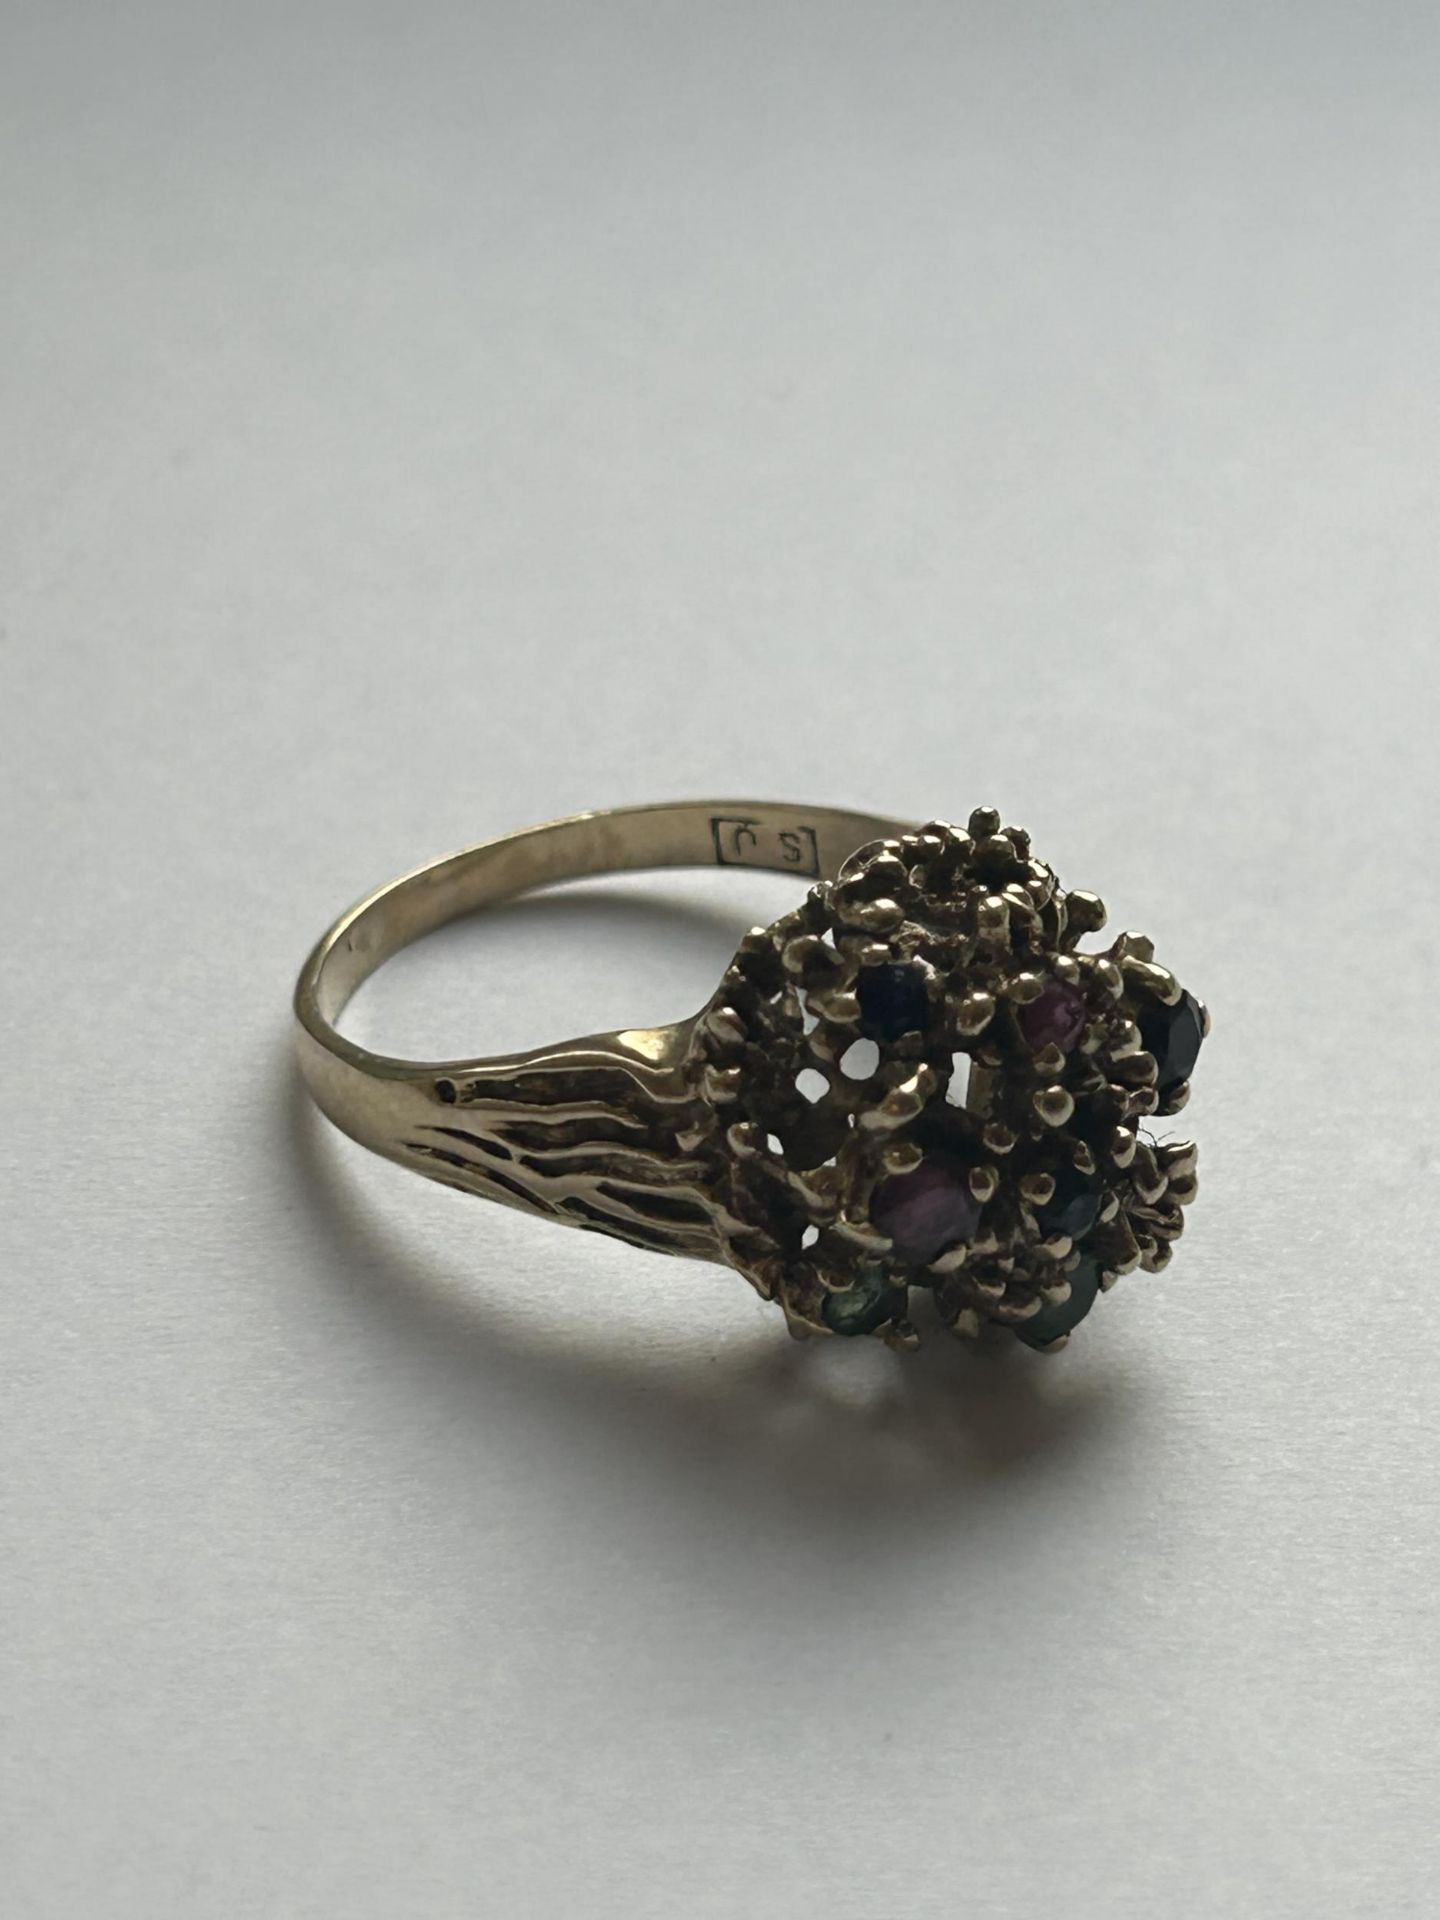 A VINTAGE 9CT YELLOW GOLD AND MULTI-STONE CLUSTER RING SIZE R, WEIGHT 4.83 GRAMS - Image 2 of 4